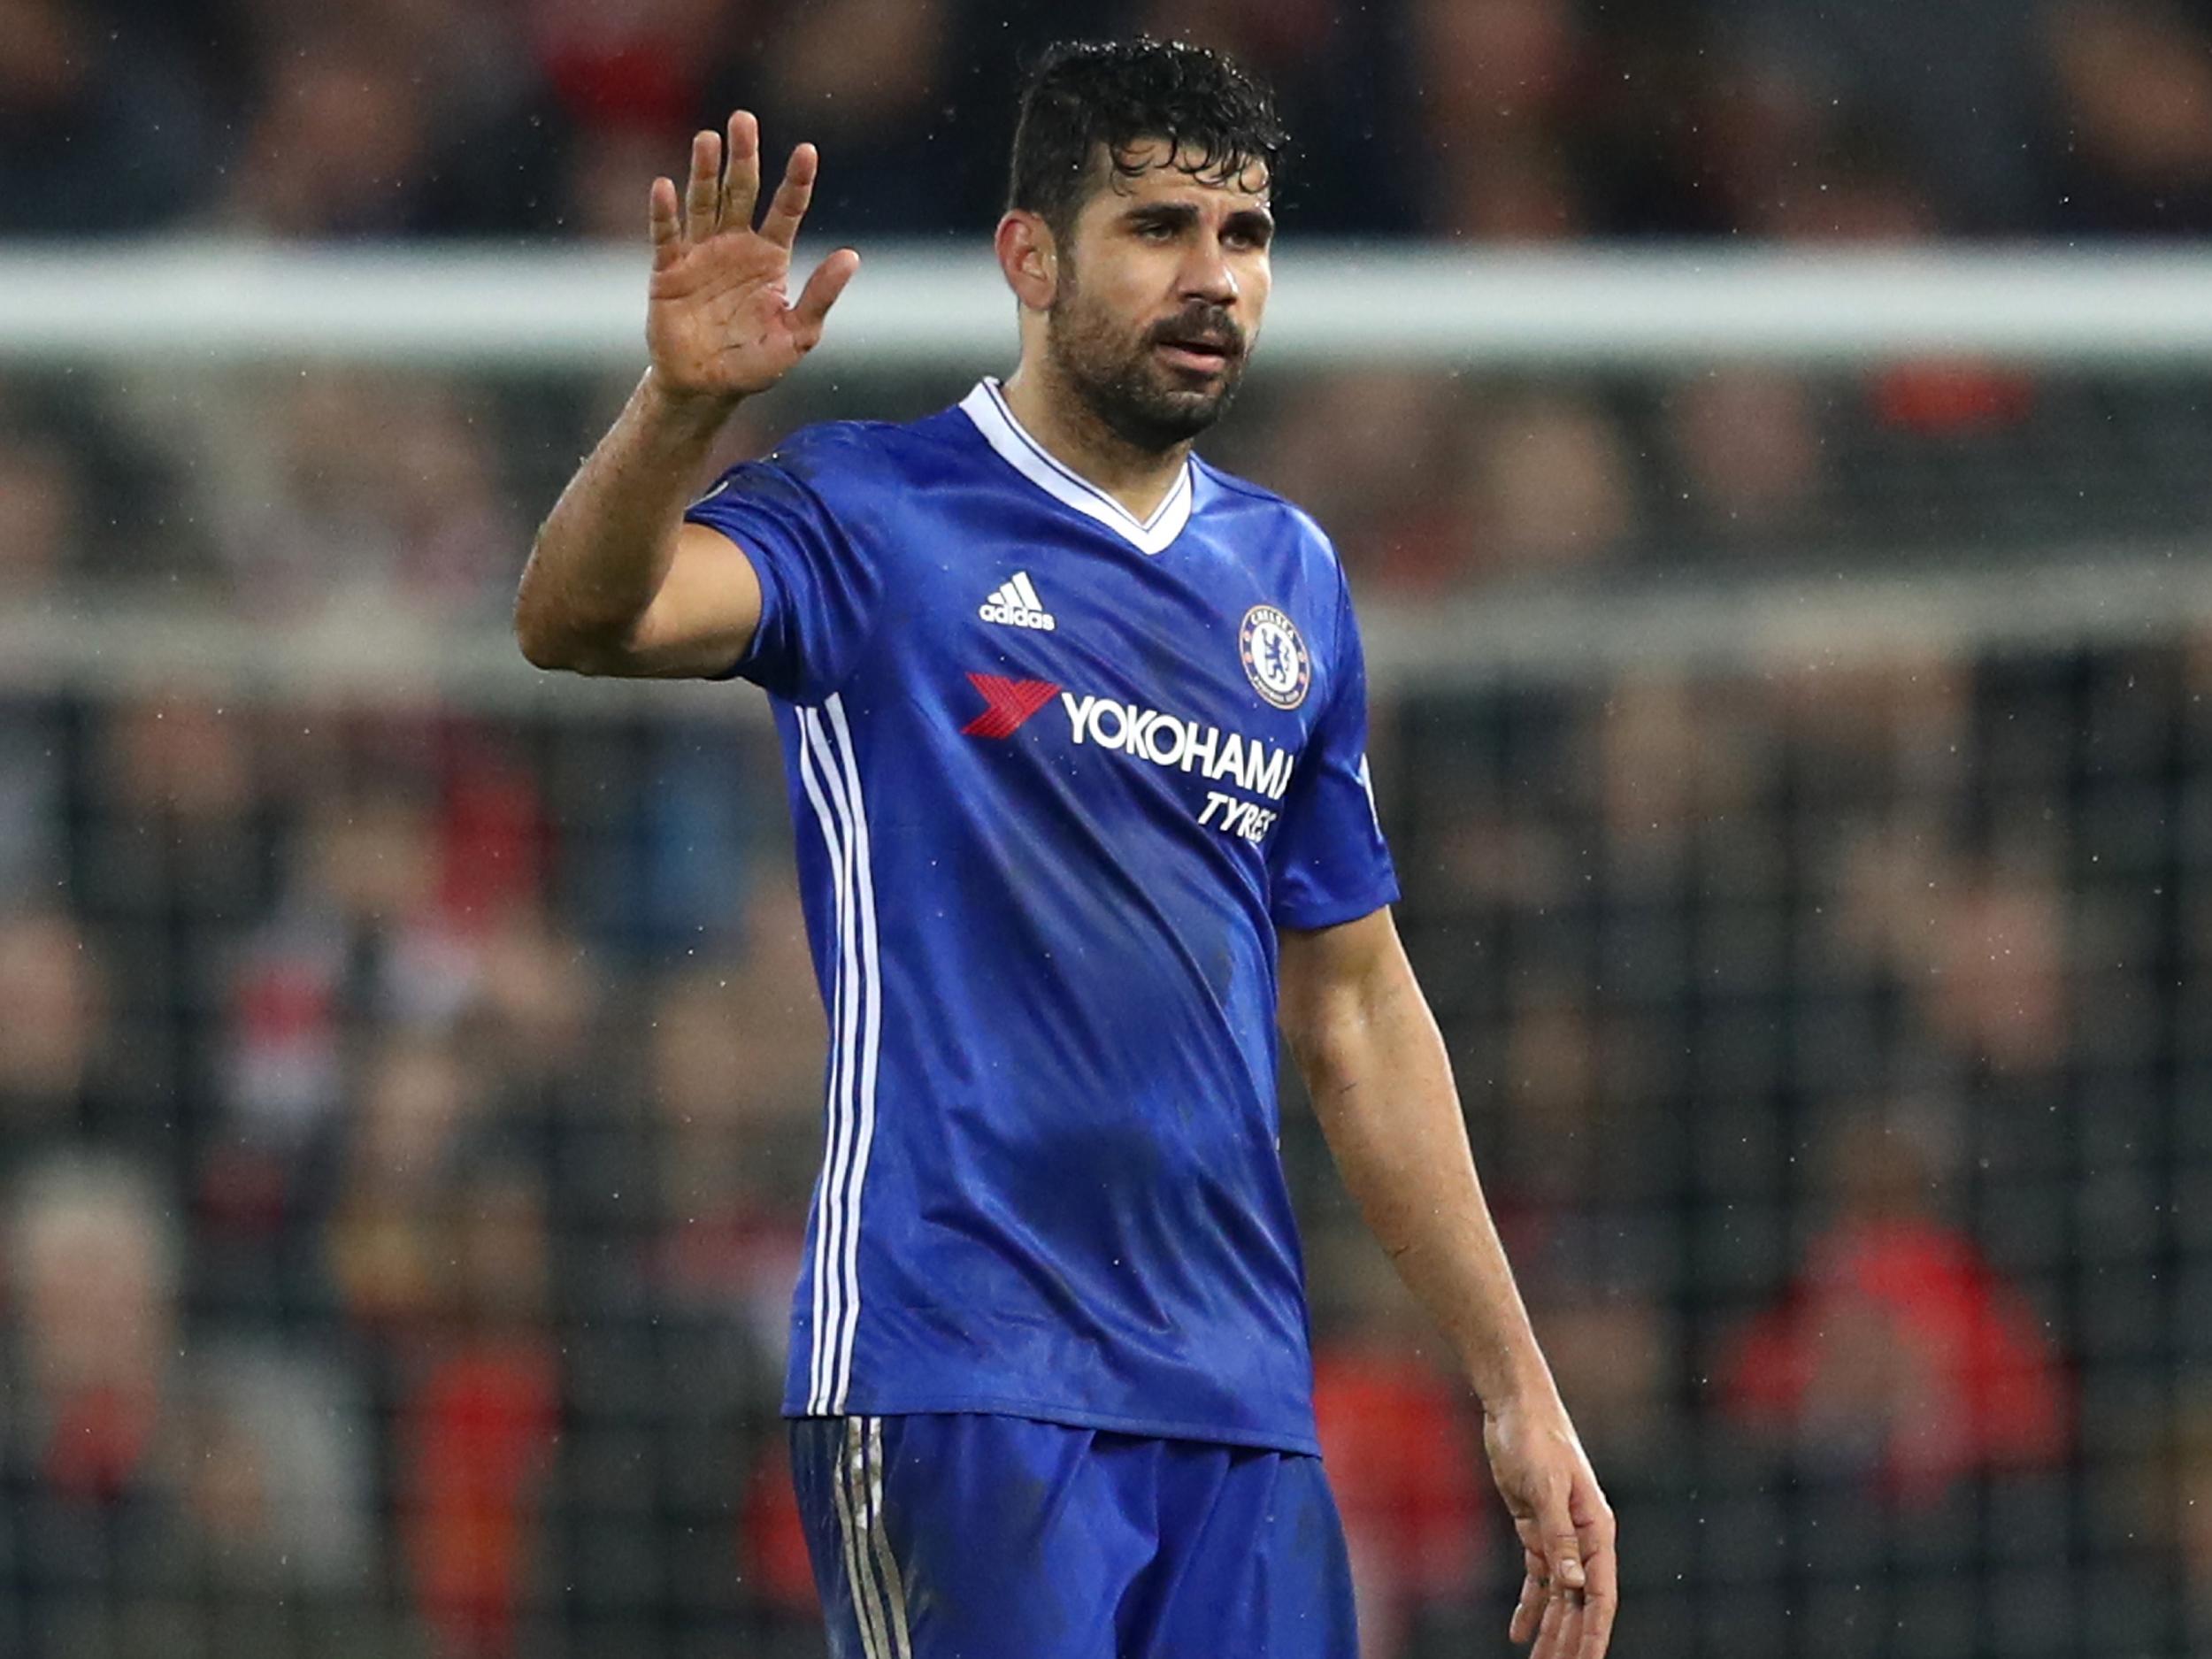 Costa was linked with a £30m-a-year move to China in January